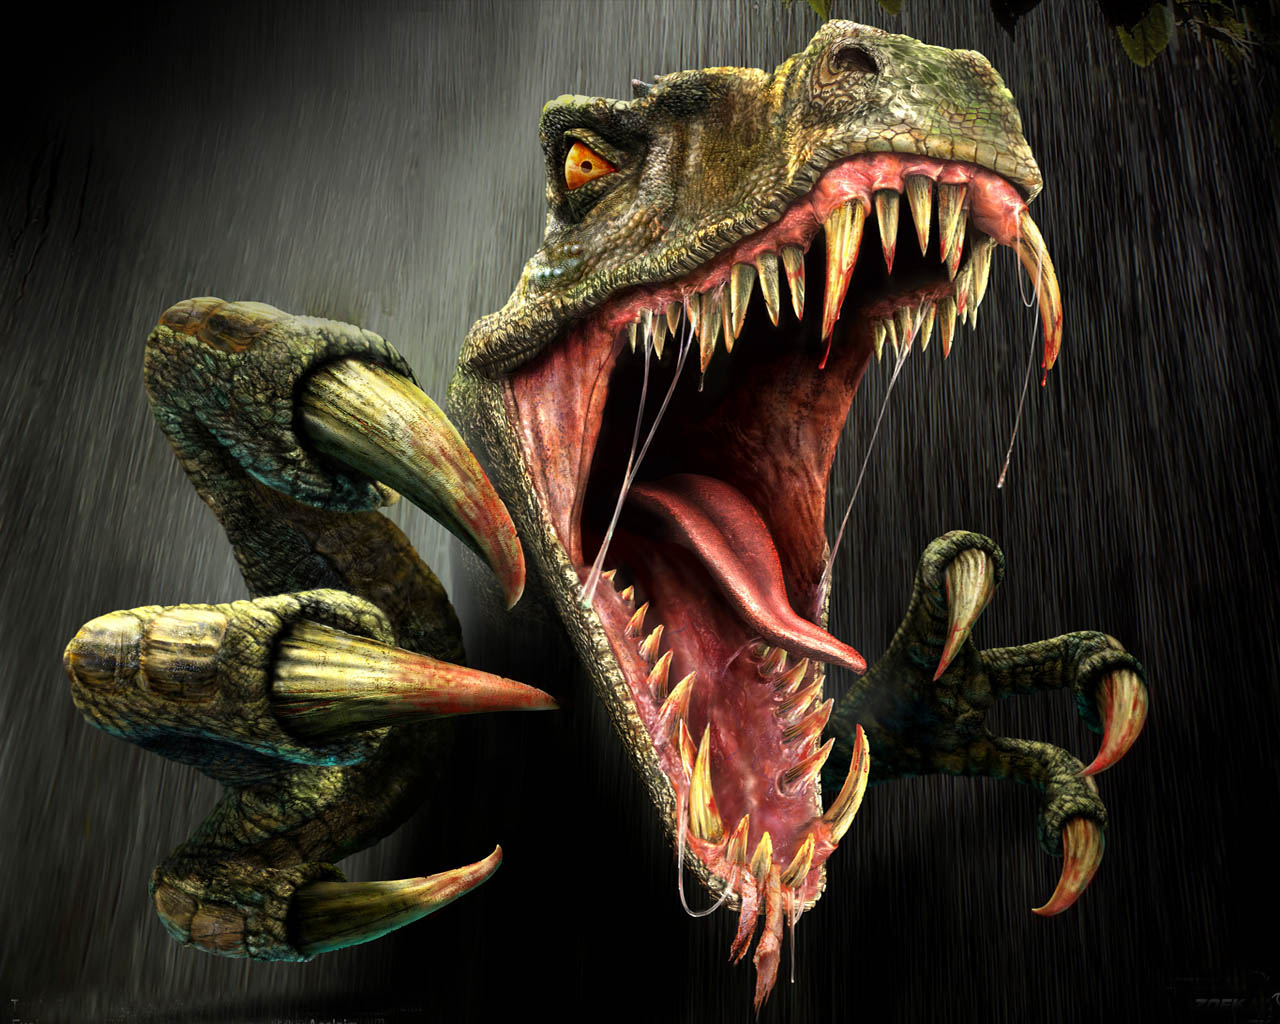 Velociraptor attack wallpaper from Other wallpapers